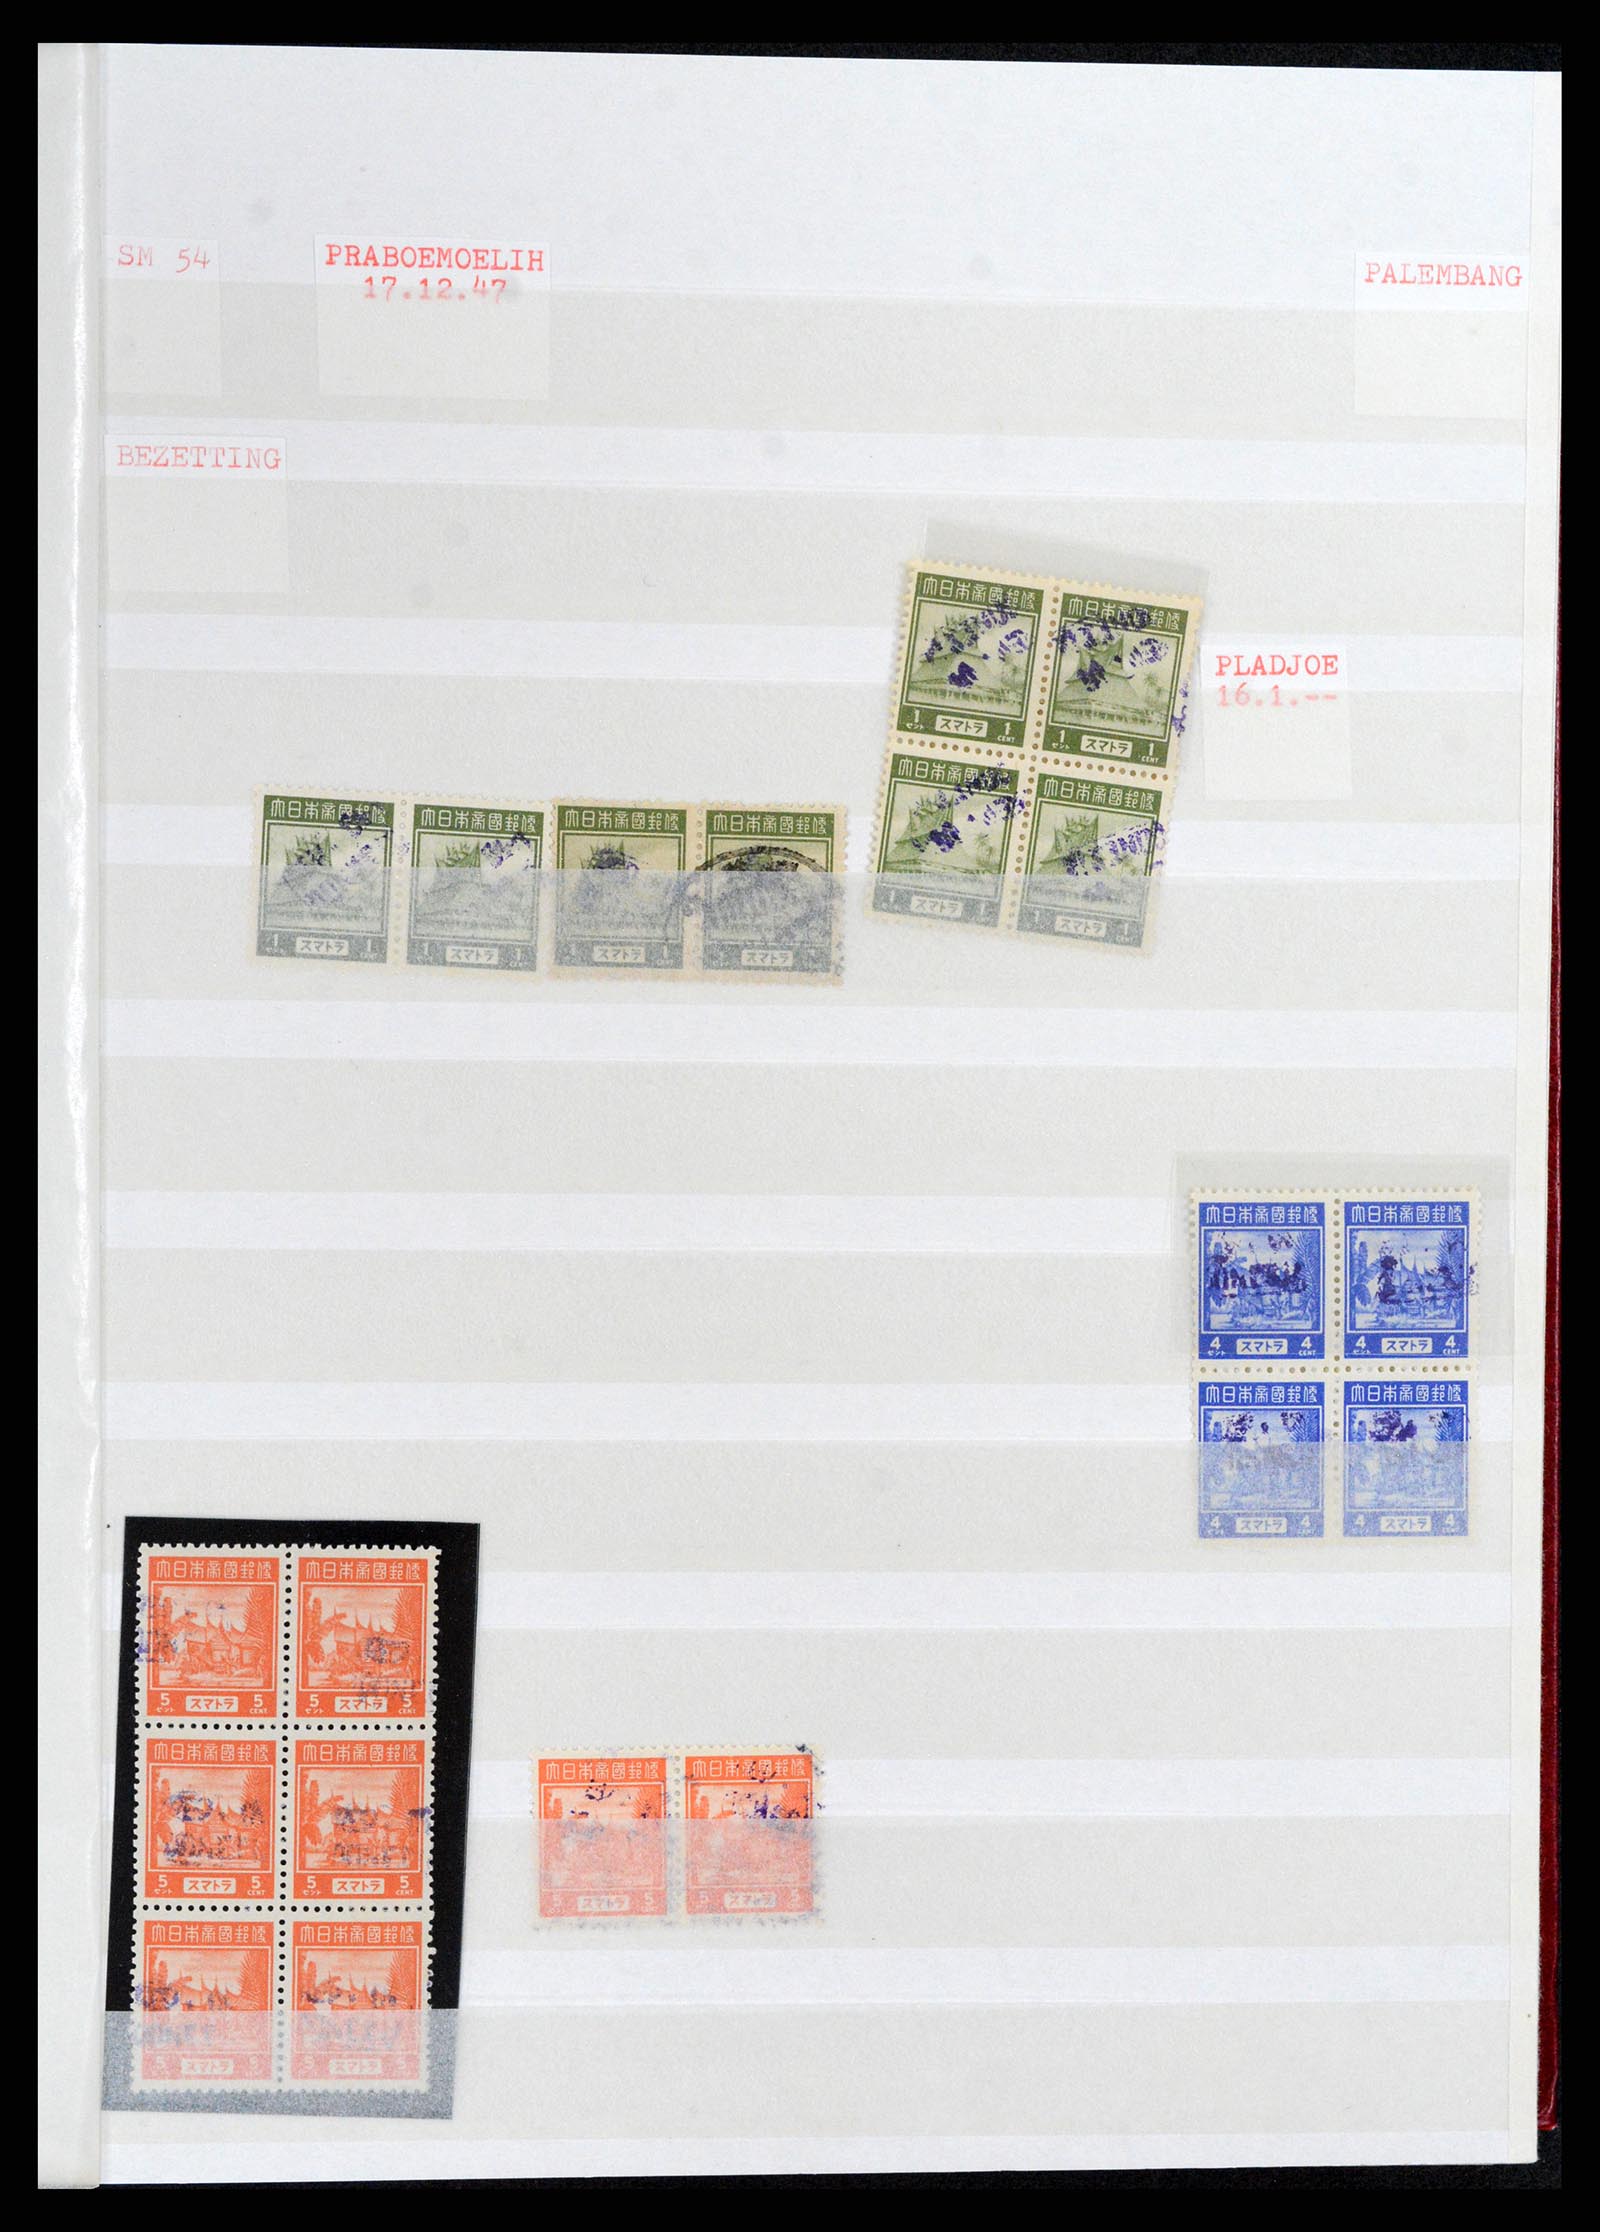 37692 063 - Stamp collection 37692 Indonesia interimperiod 1945-1499.